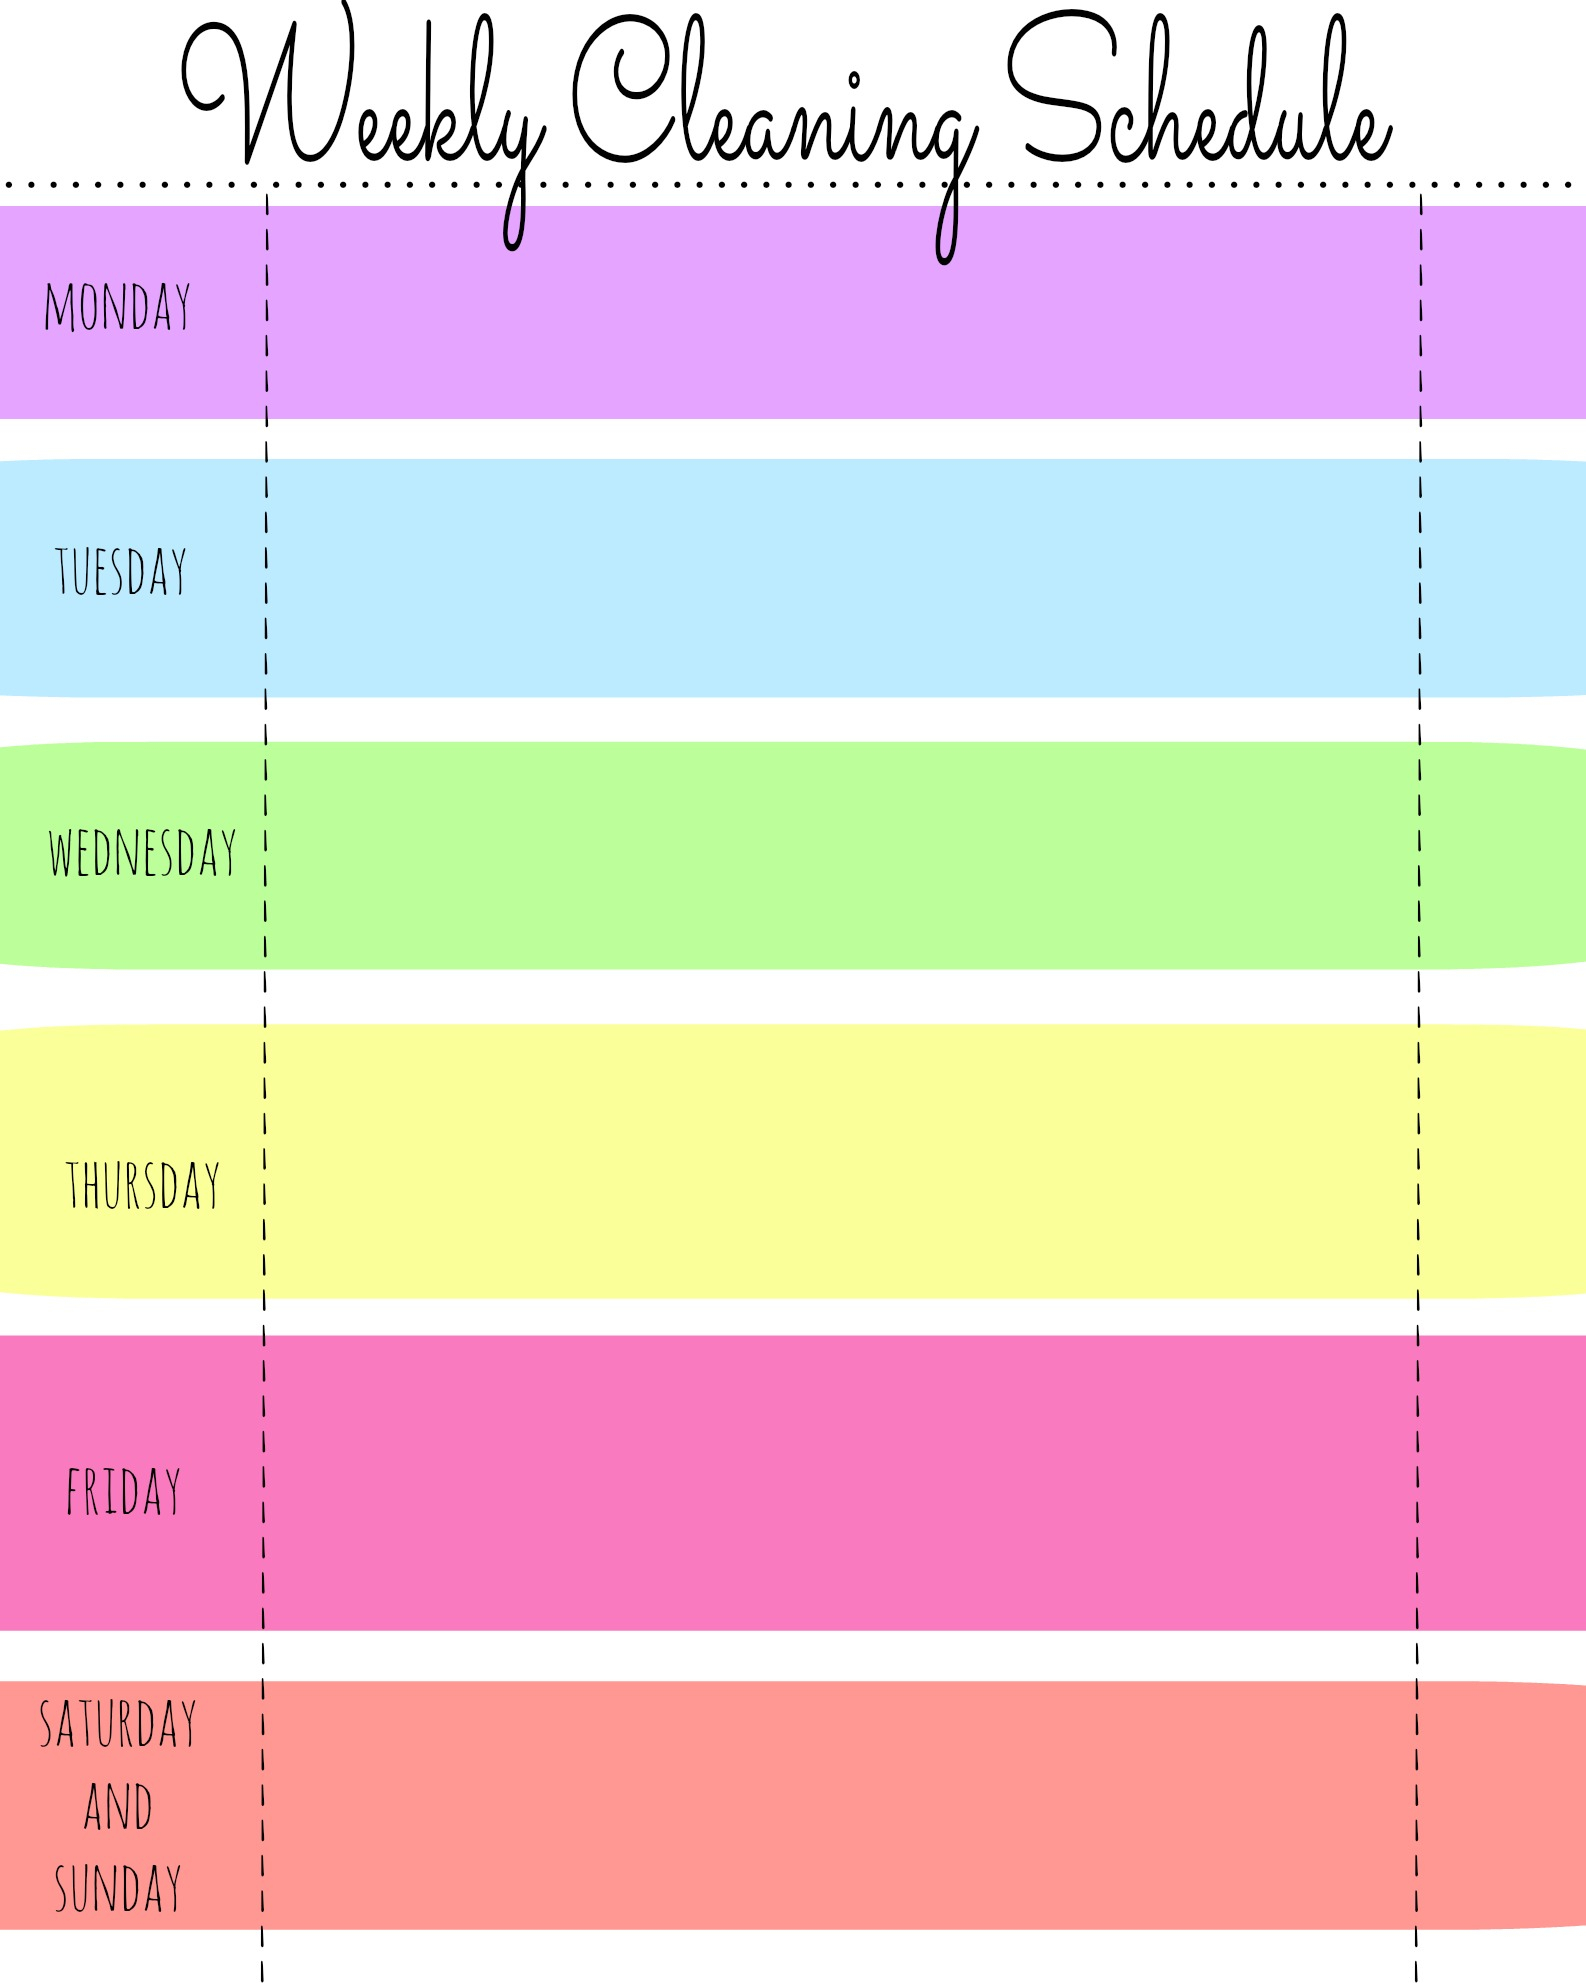 My Quirky Weekly Cleaning Chart: Free Printable - First Home